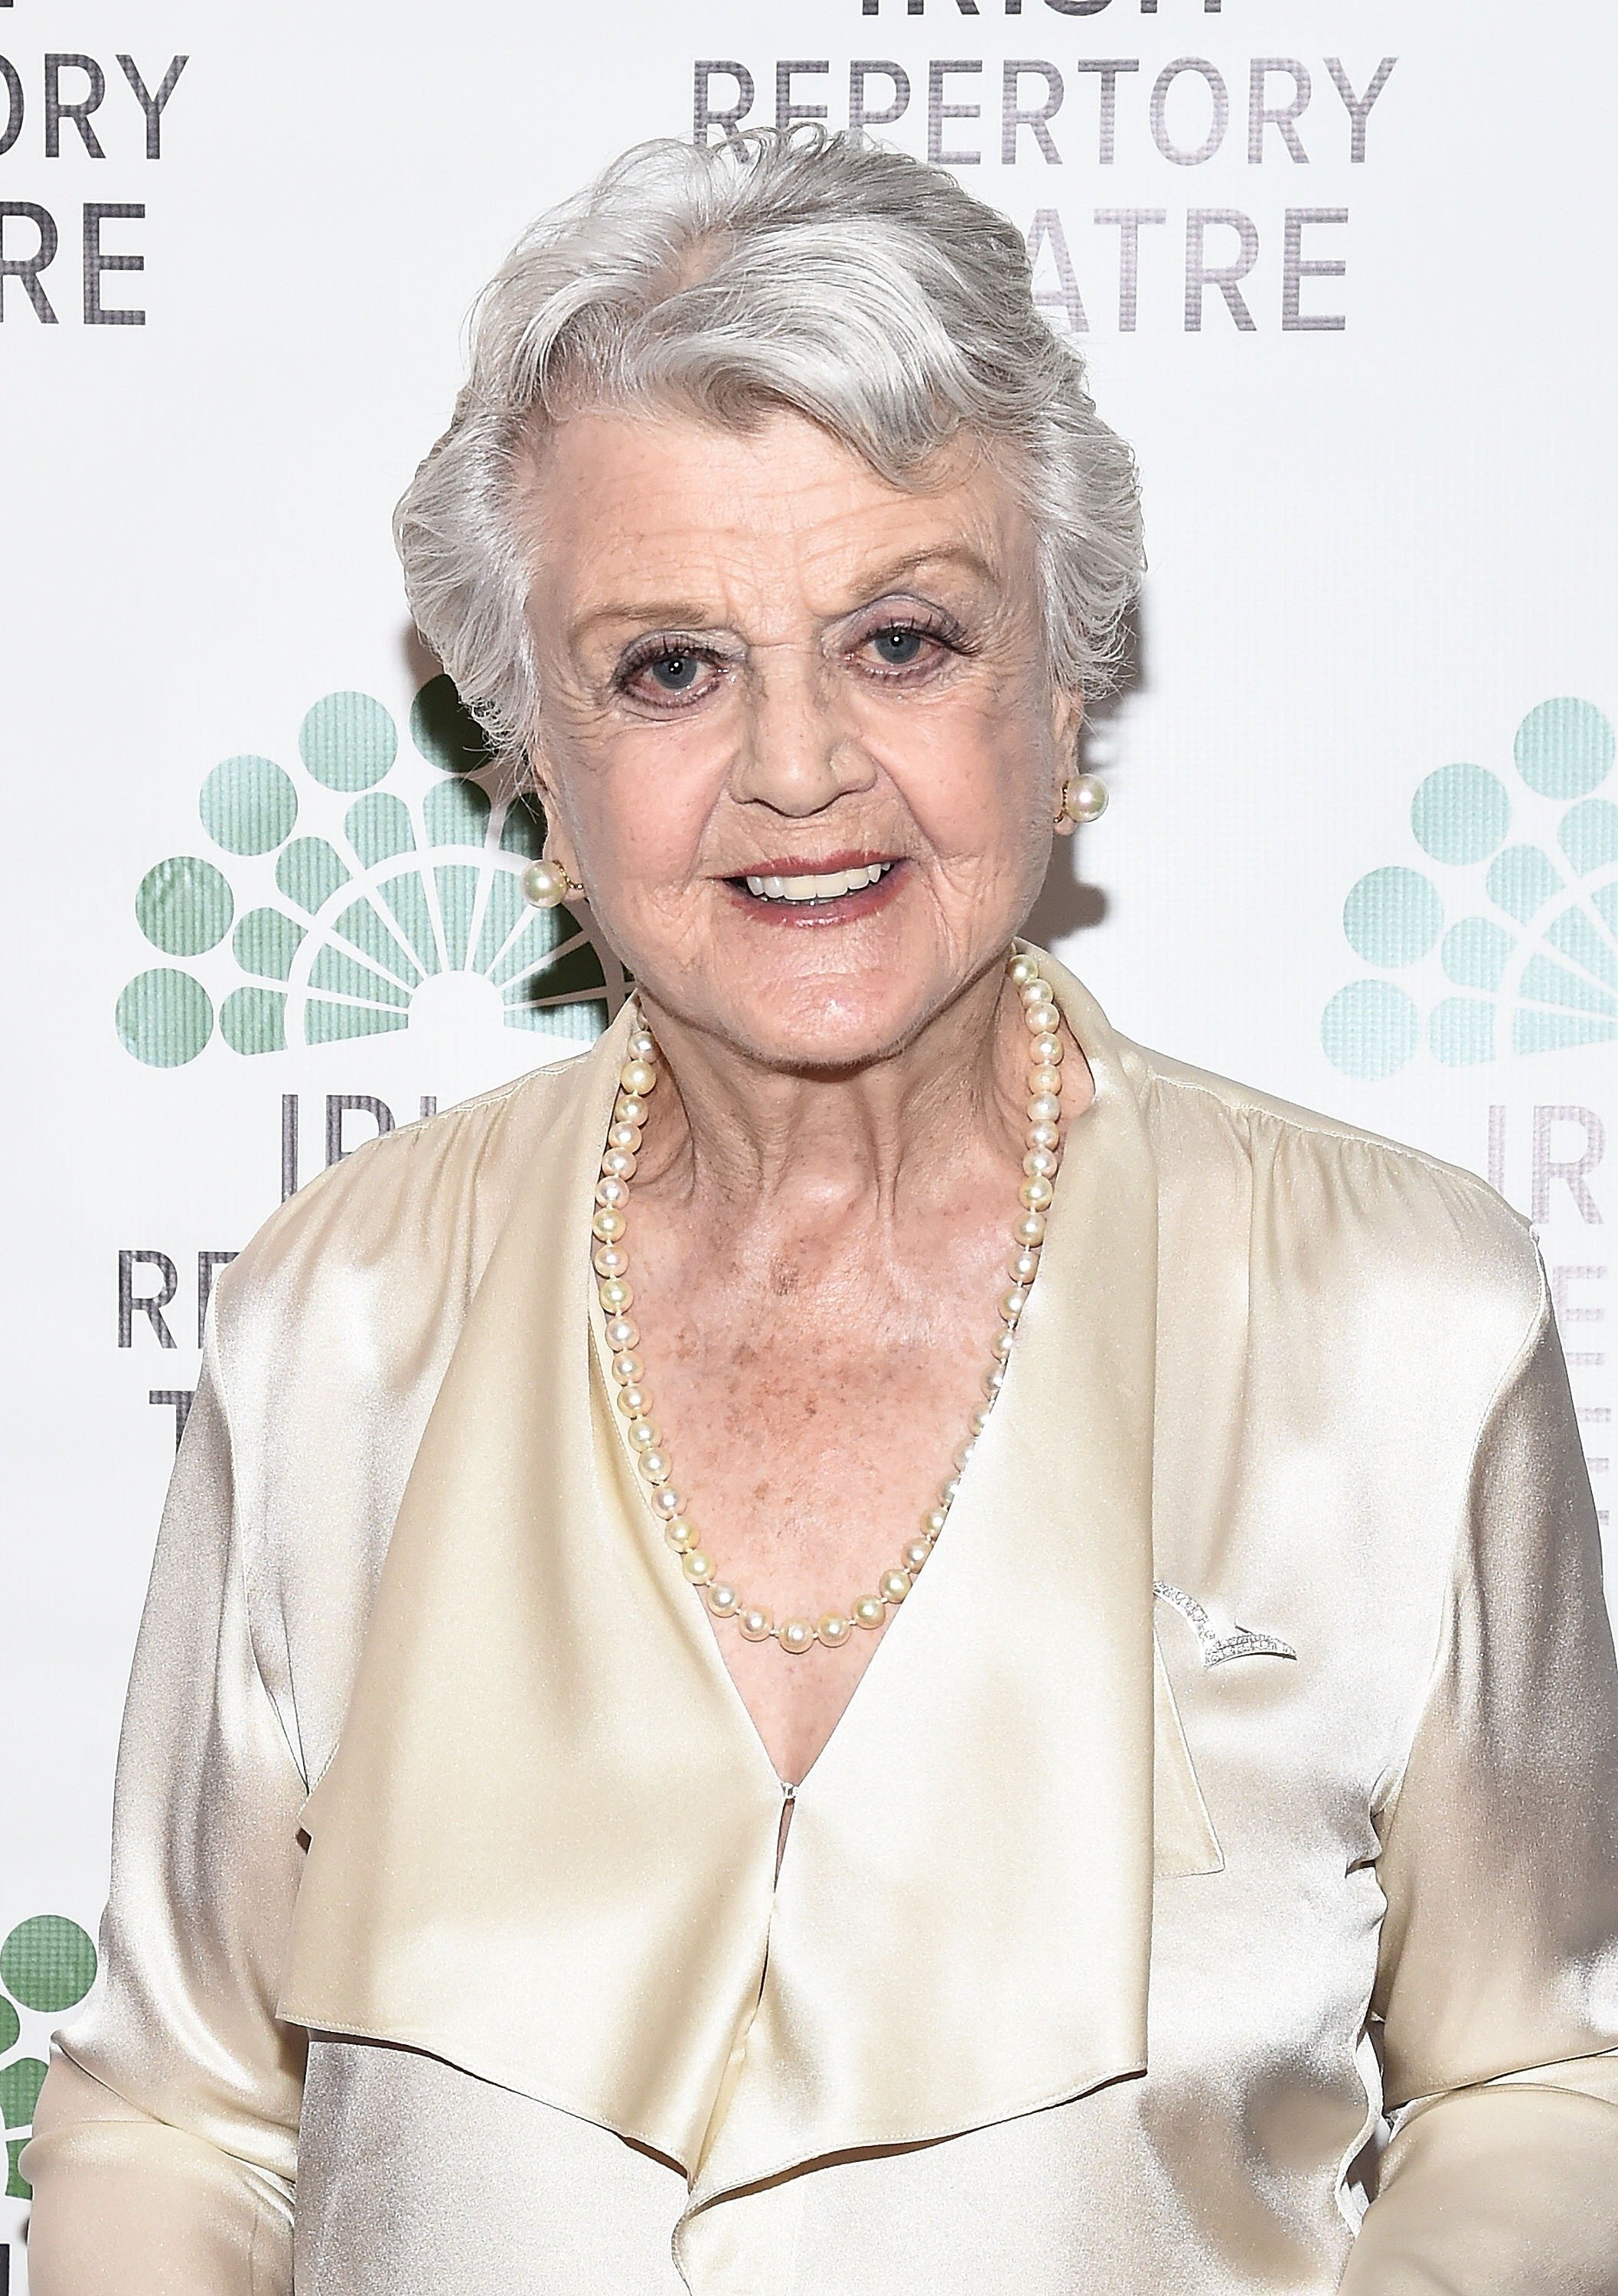 Angela Lansbury attends the 2017 Irish Repertory Theatre Gala at Town Hall on June 13, 2017 in New York City. | Source: Getty Images